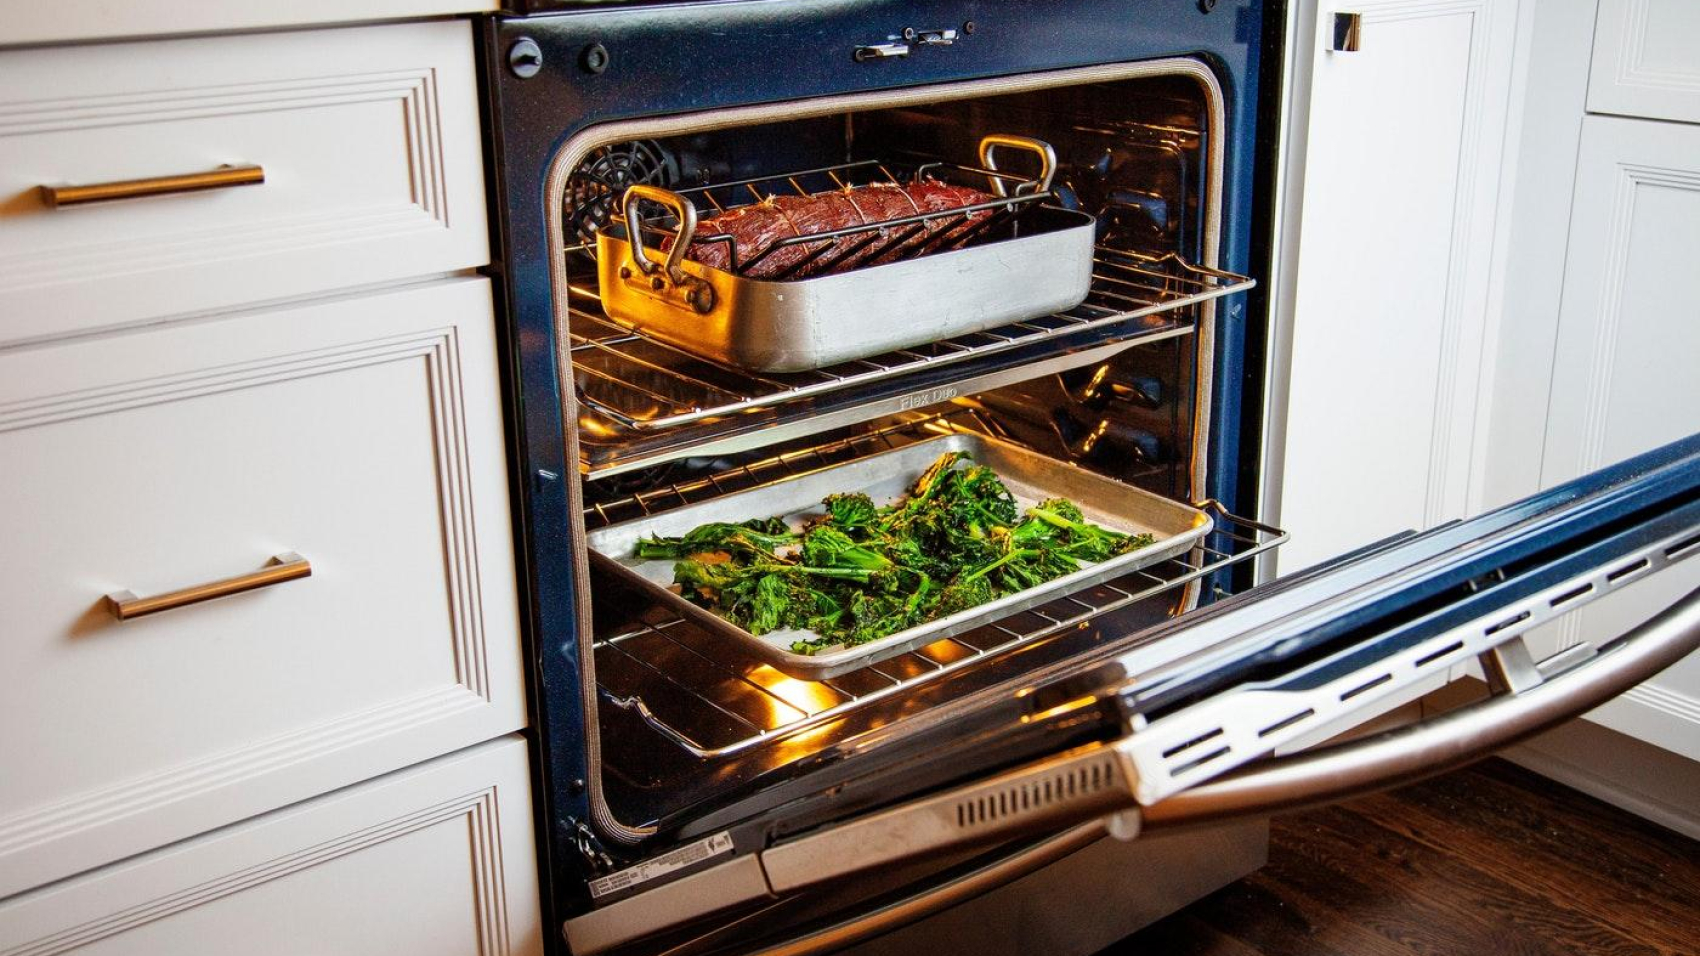 Top five reasons for your oven to do not work properly